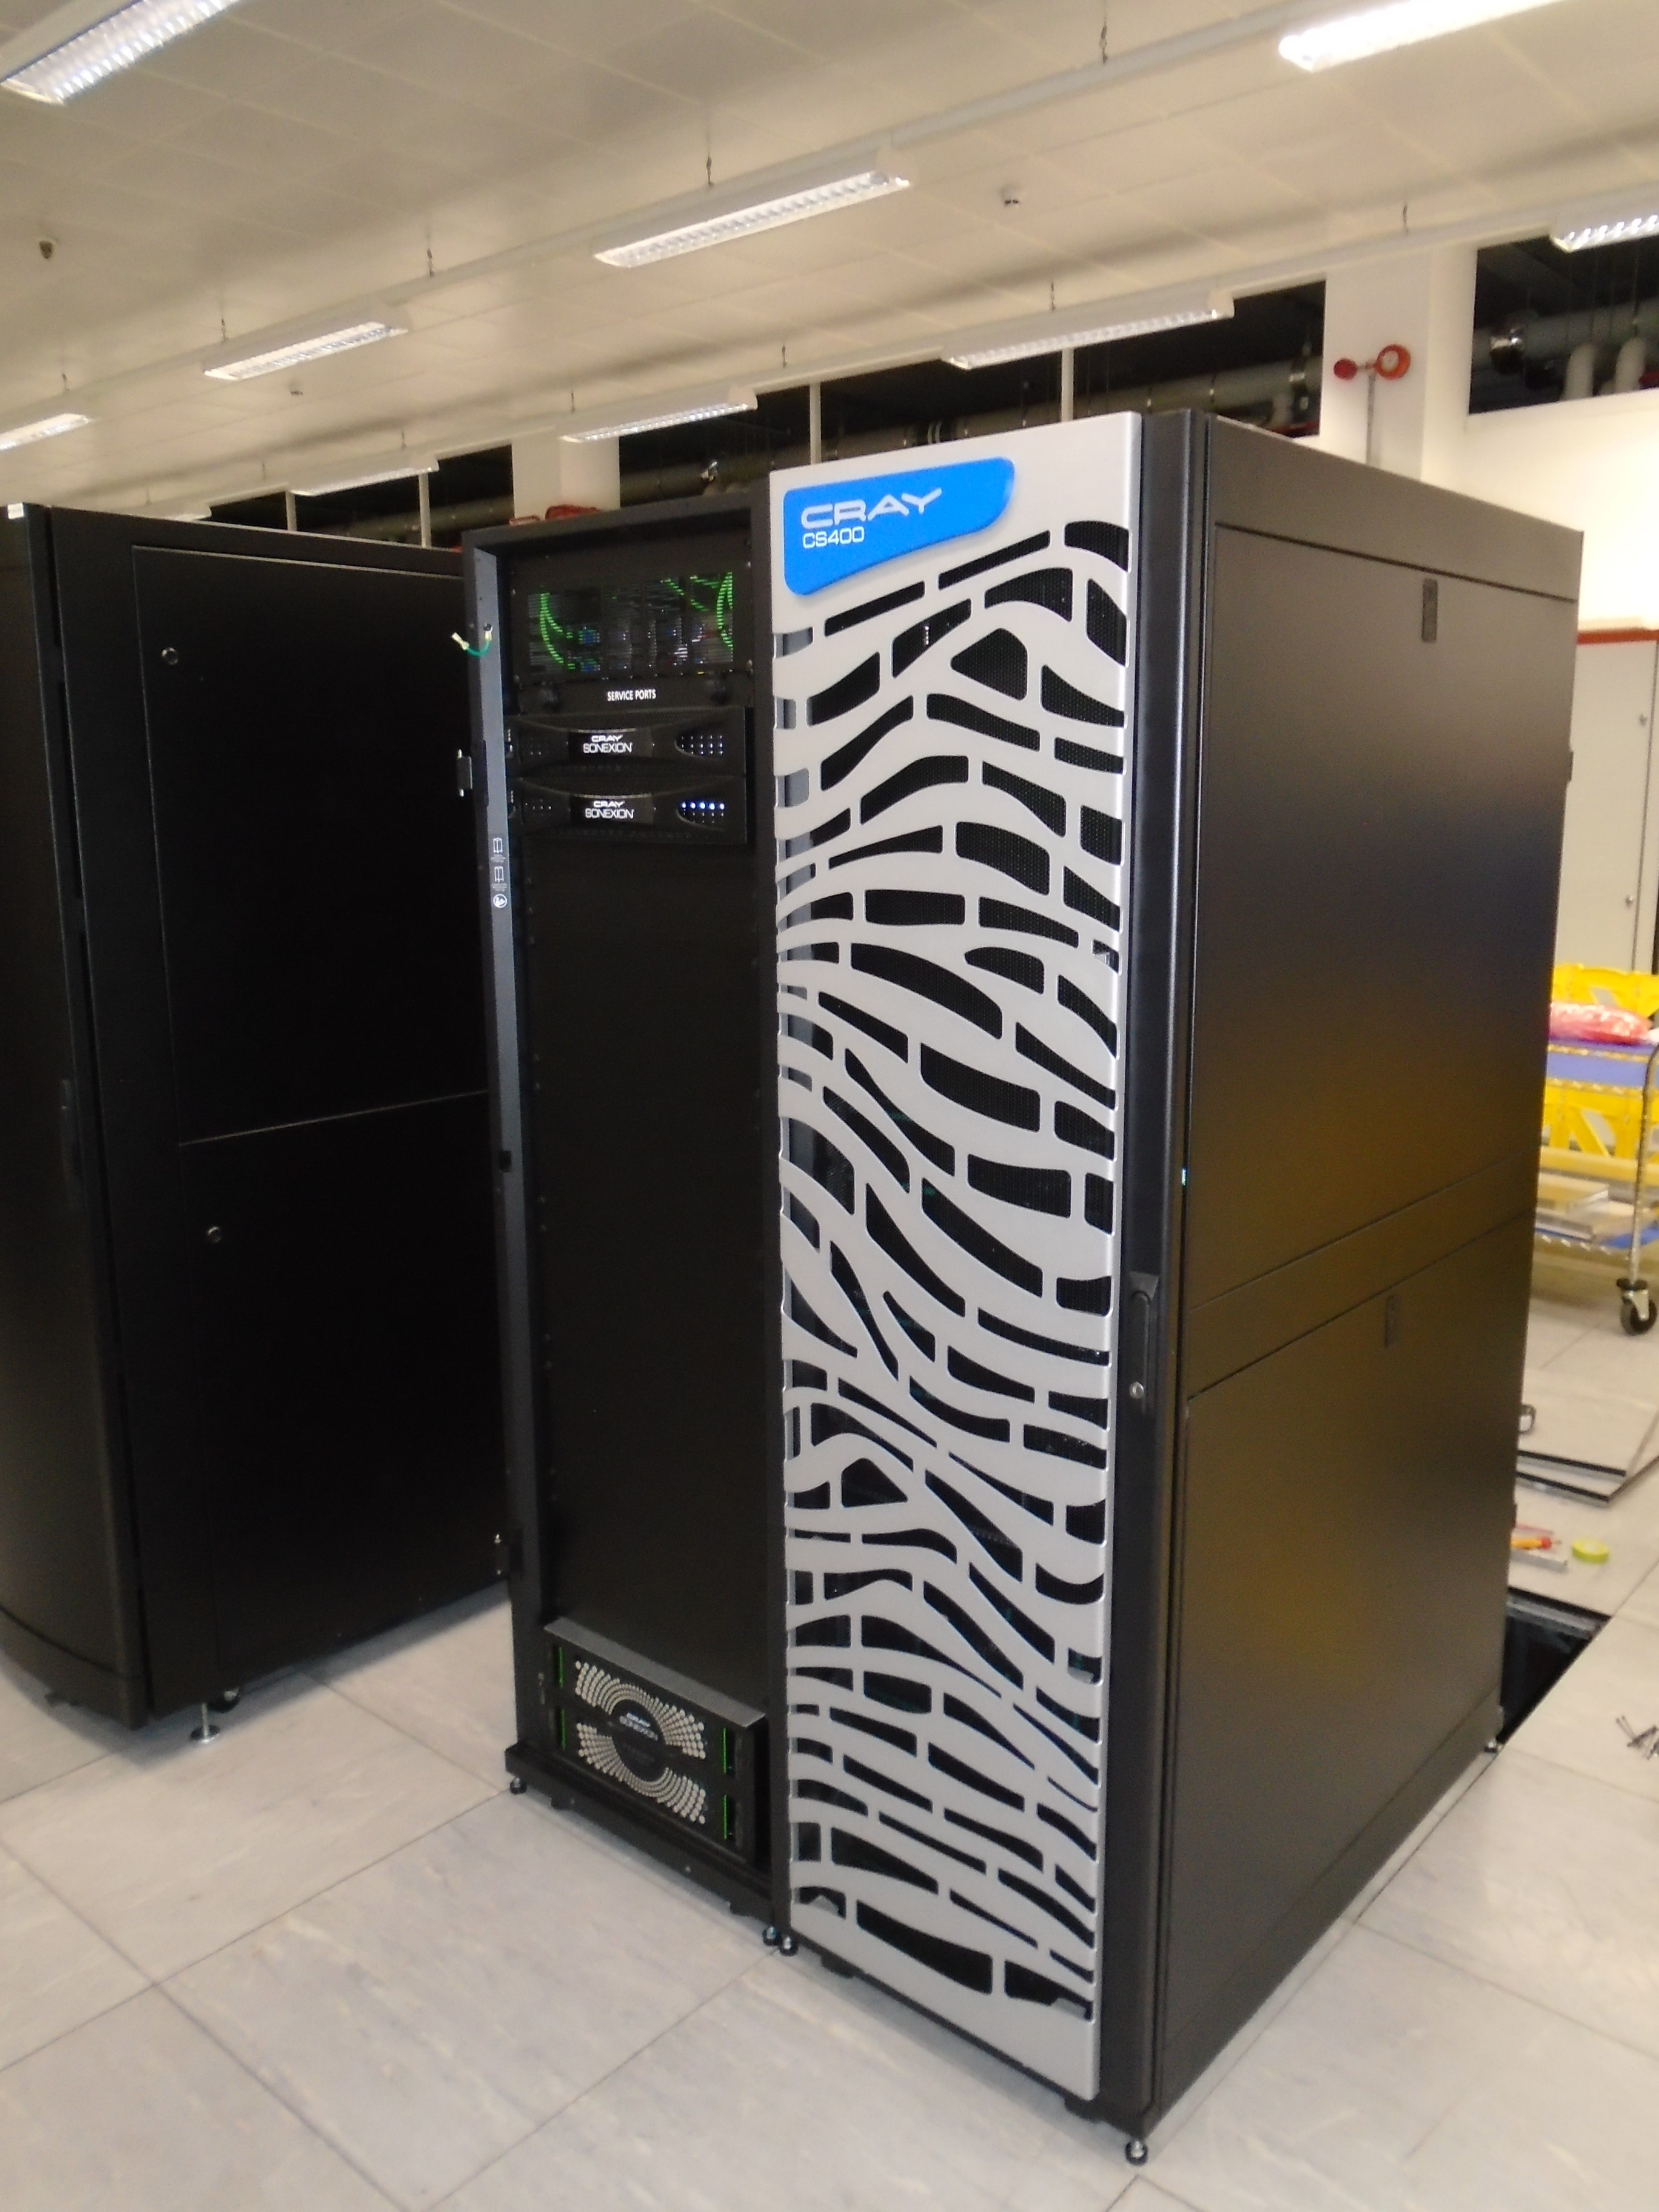 Supercomputer Isambard delivery to Met Office